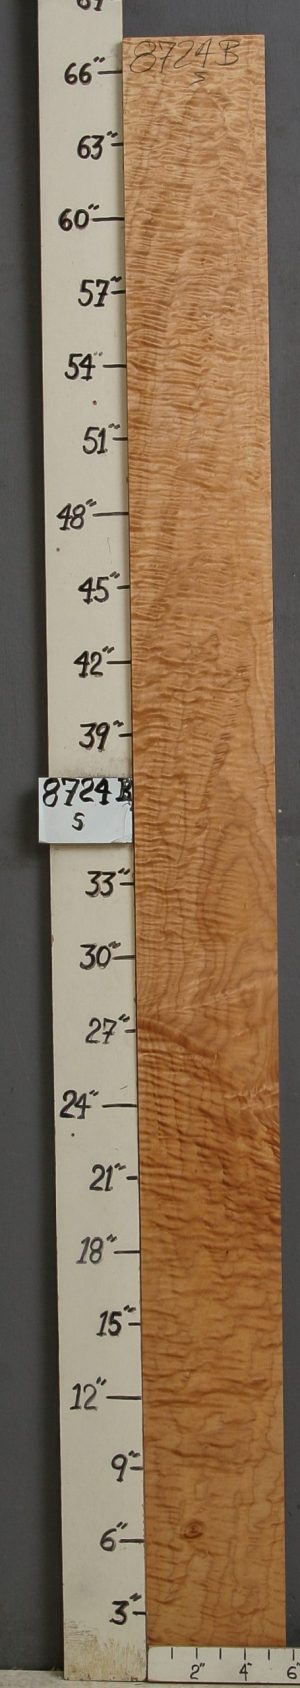 MUSICAL QUILTED MAPLE LUMBER 5"3/4 X 67" X 4/4 (NWT-8724B)